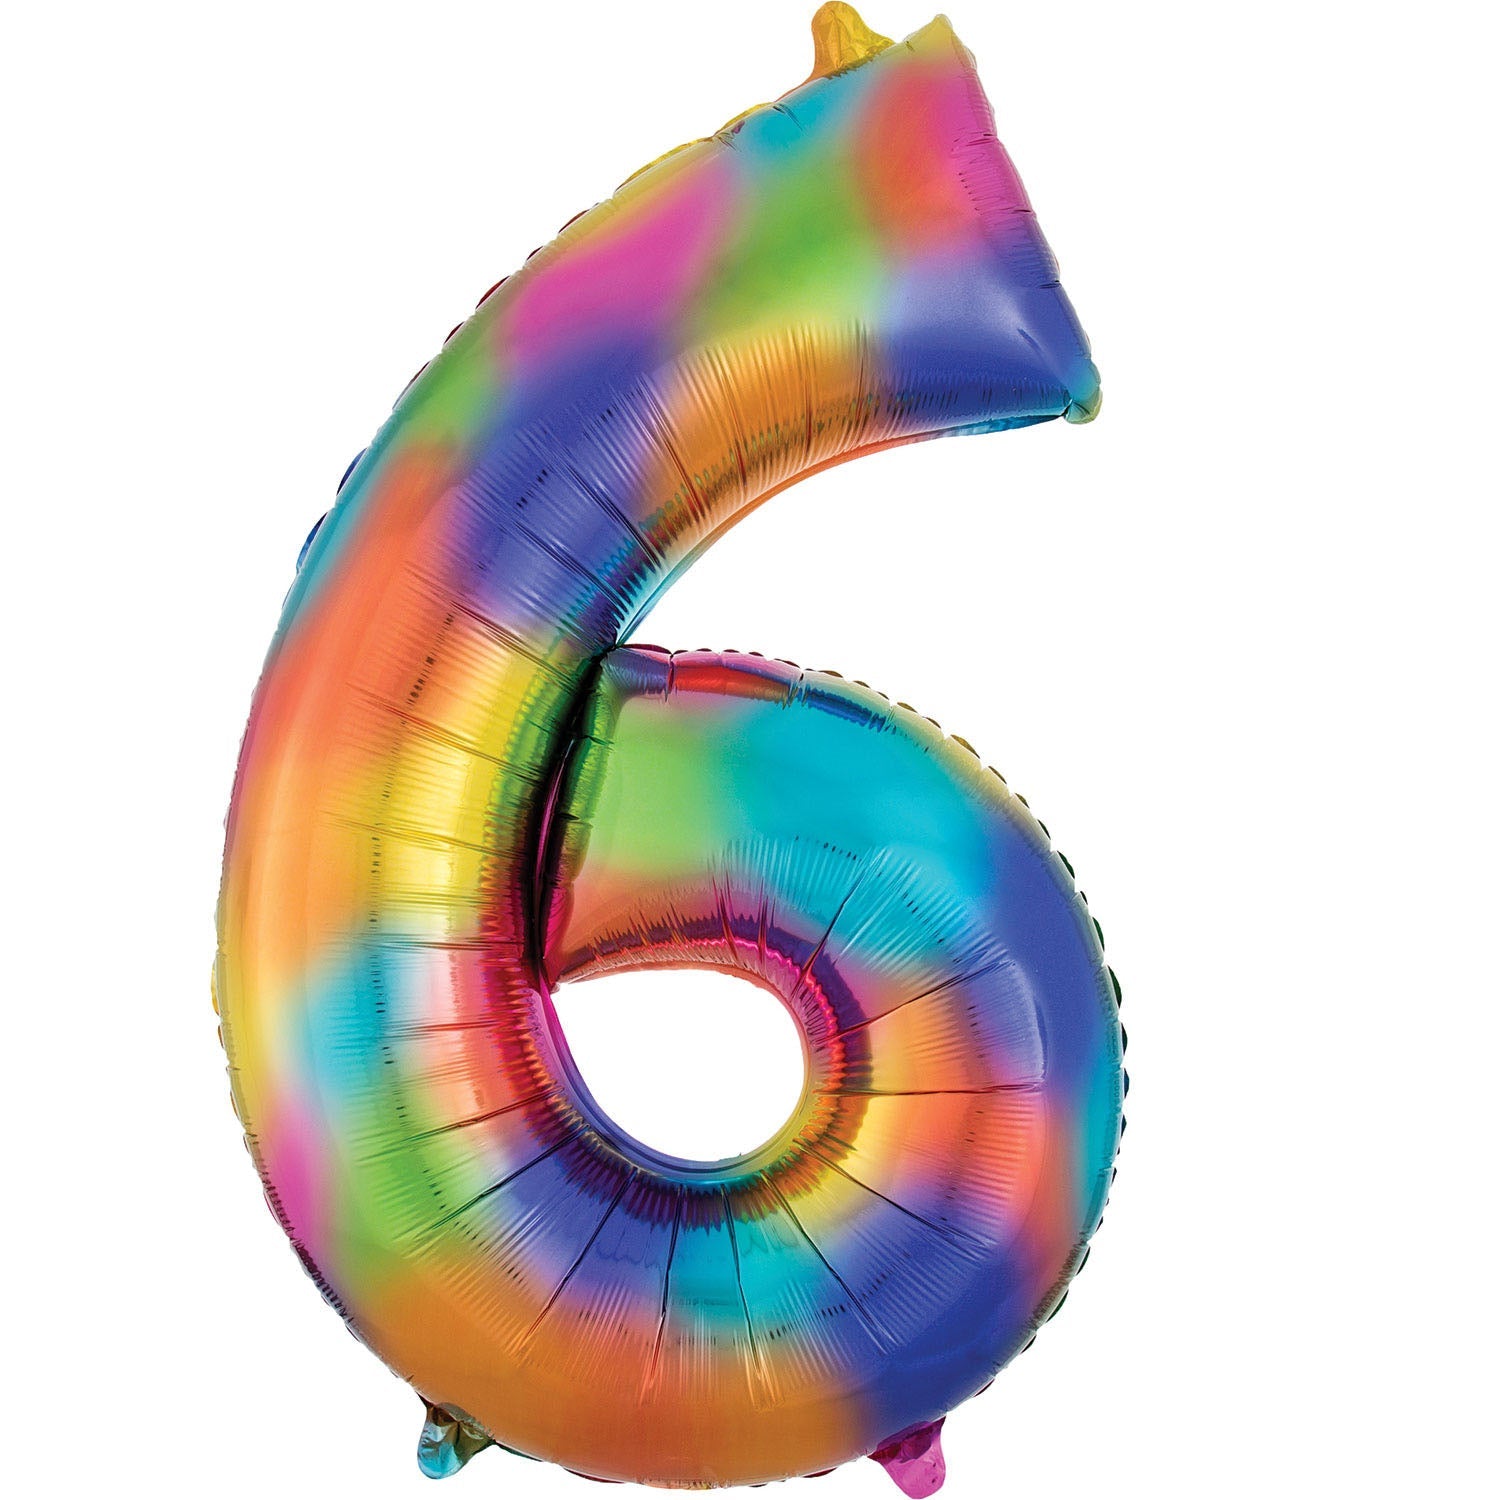 Rainbow Splash Supershape Number 6 Foil Balloon 86cm (34in) height by 55cm (22in) width Balloon is sold uninflated. Can be inflated with air or helium.